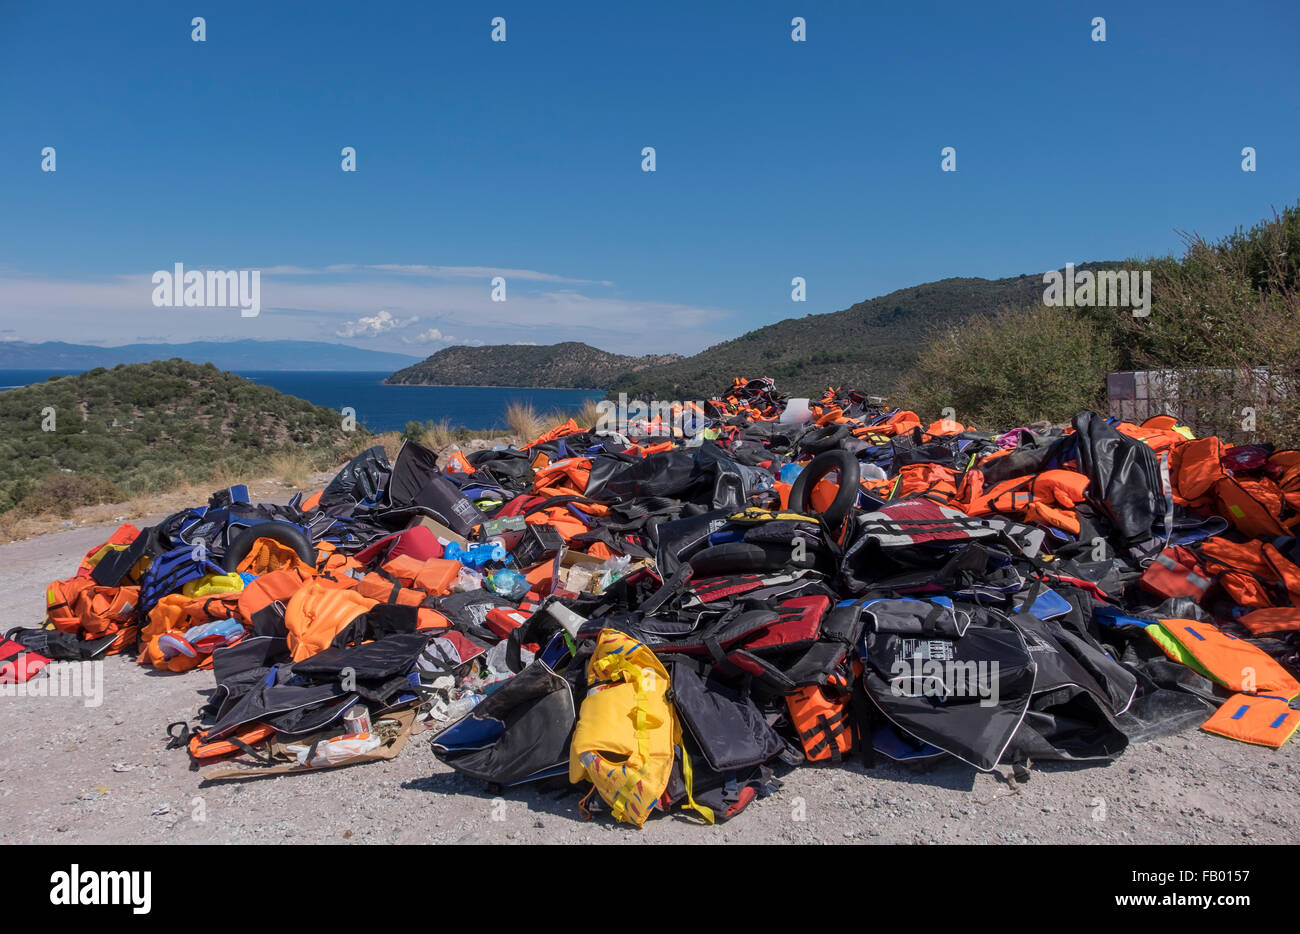 A mountain of life vests left behind by refugees crossing into the Greek island of Lesvos from Turkey (in the distance). Stock Photo